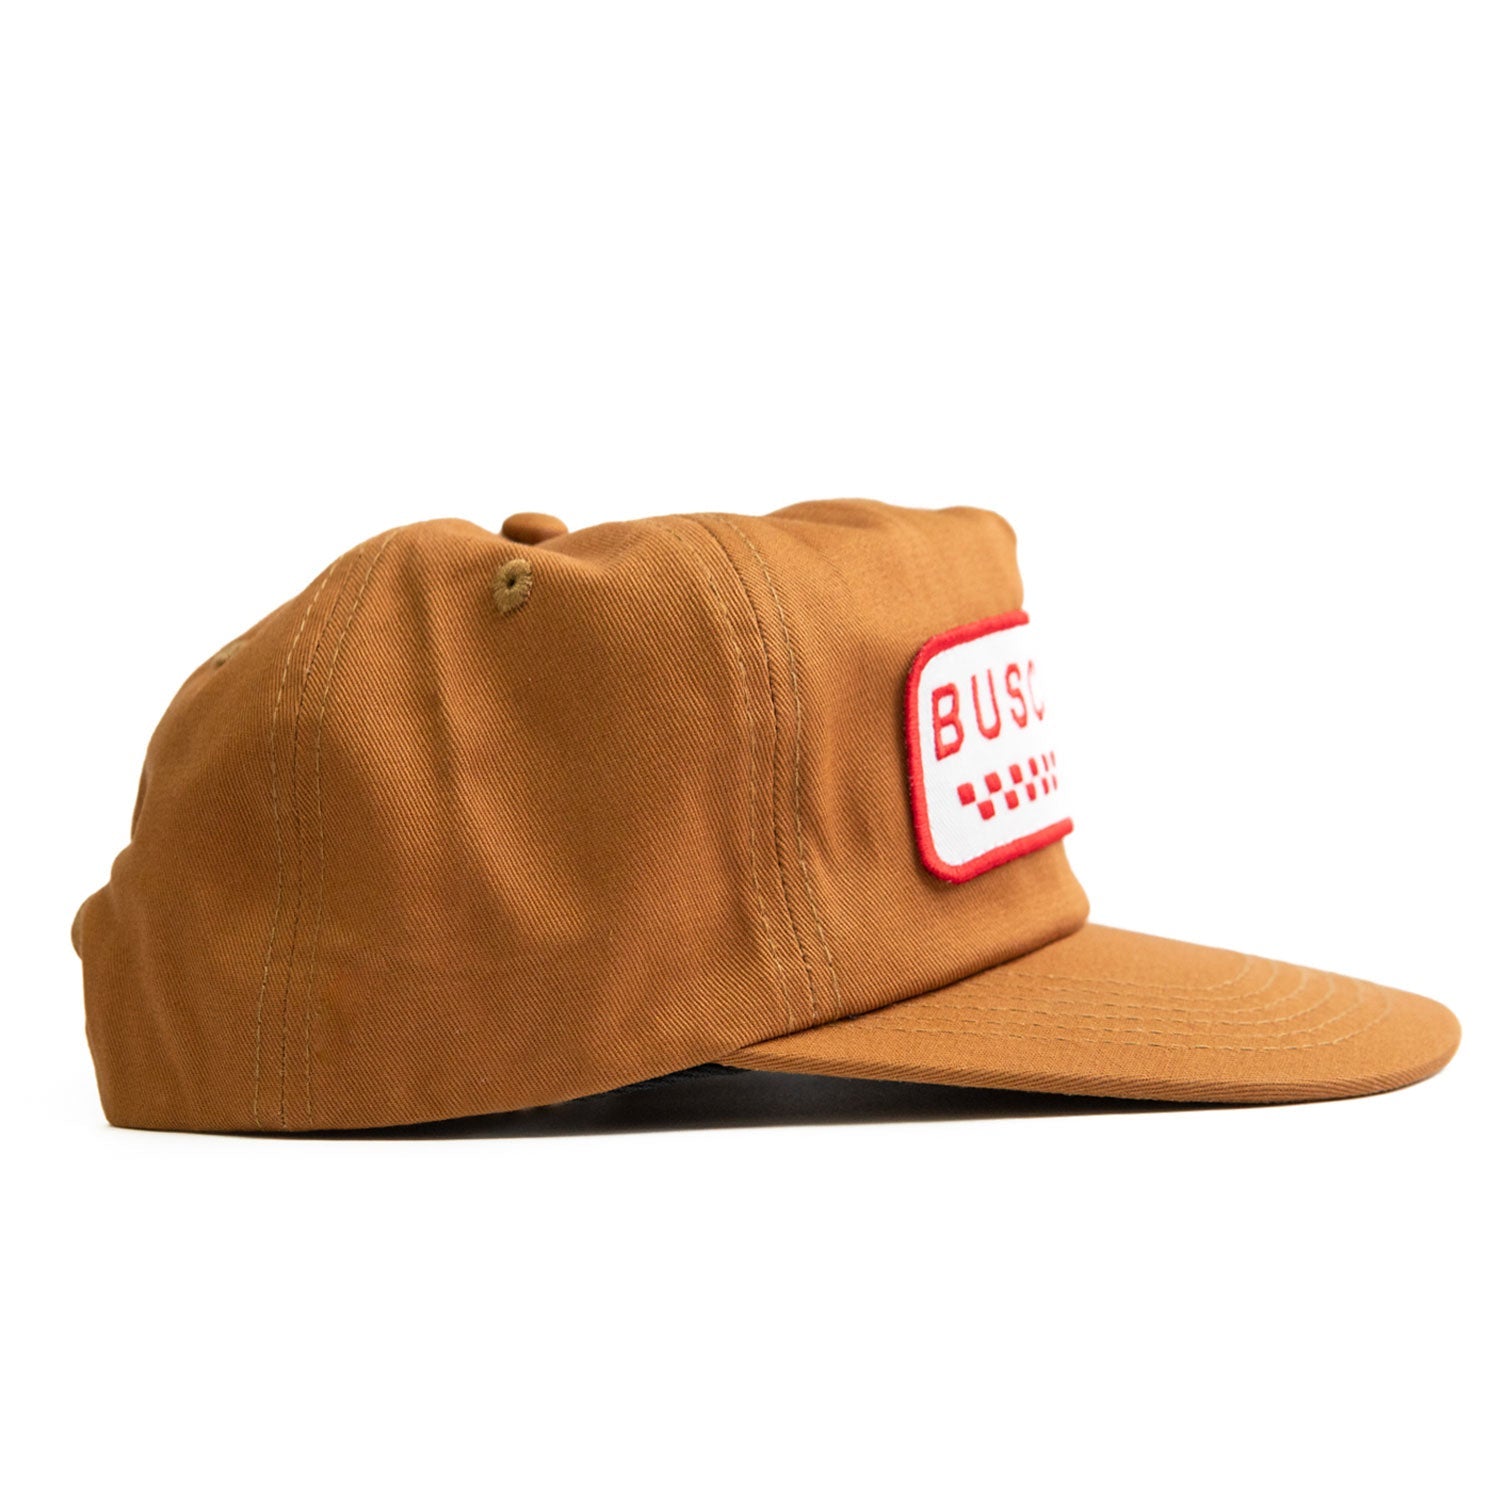 ‘Checker Moto’ Unstructured 5 panel Hat - Camel - Buscadero Motorcycles